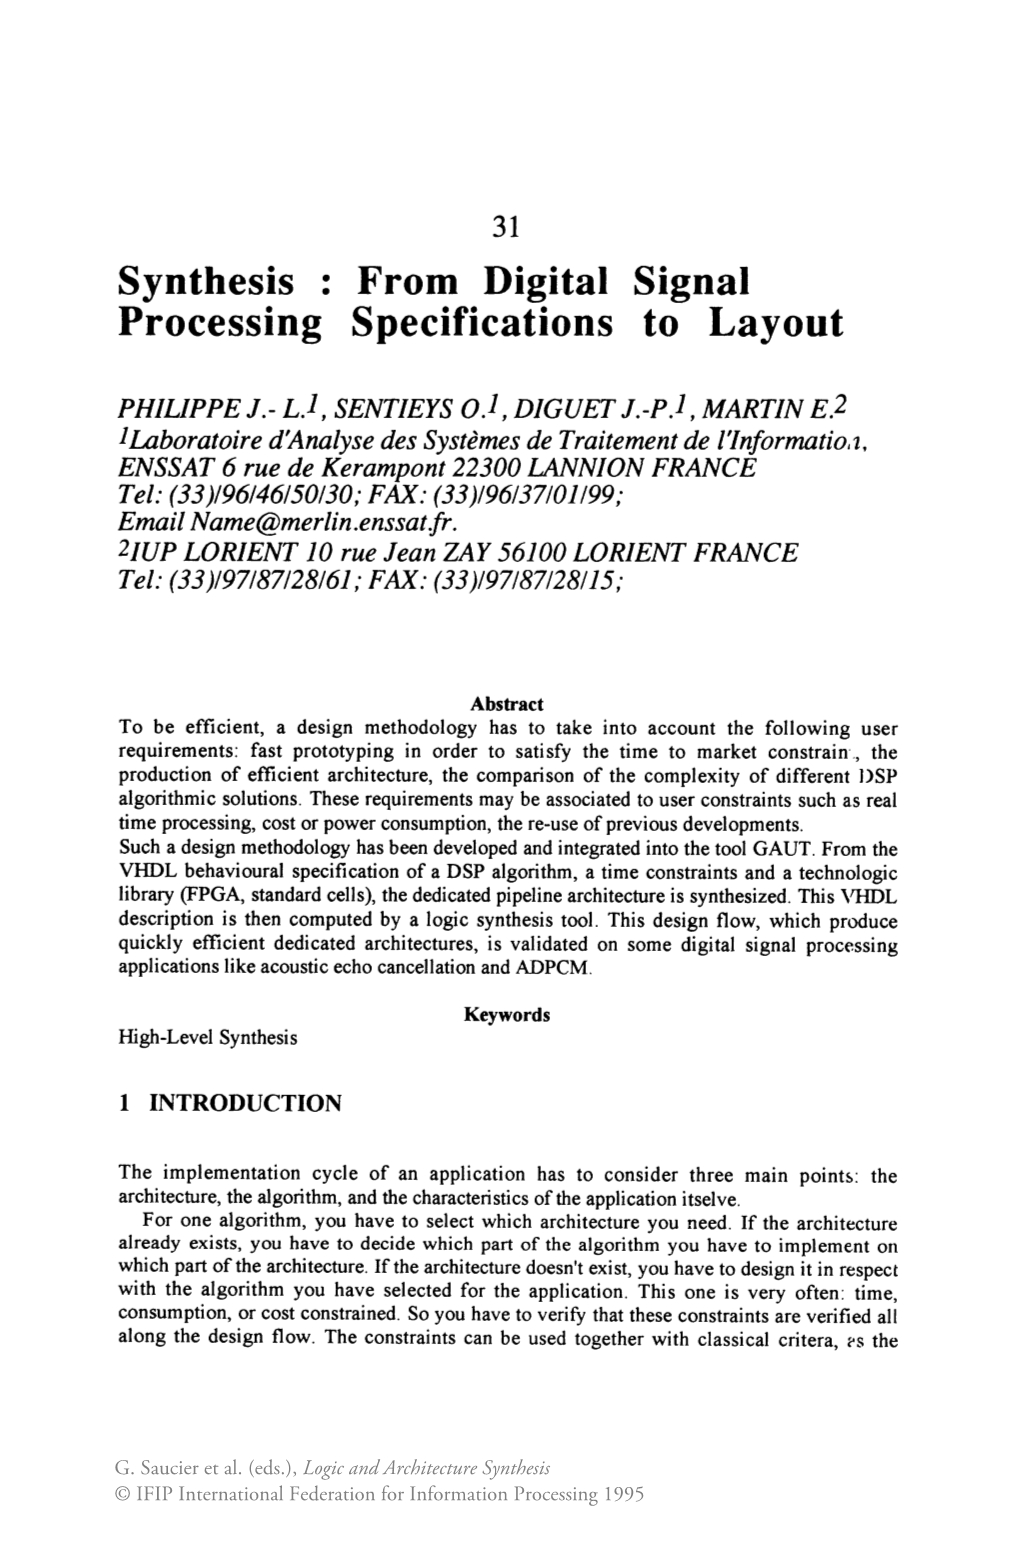 Synthesis Processing from Digital Specifications Signal to Layout